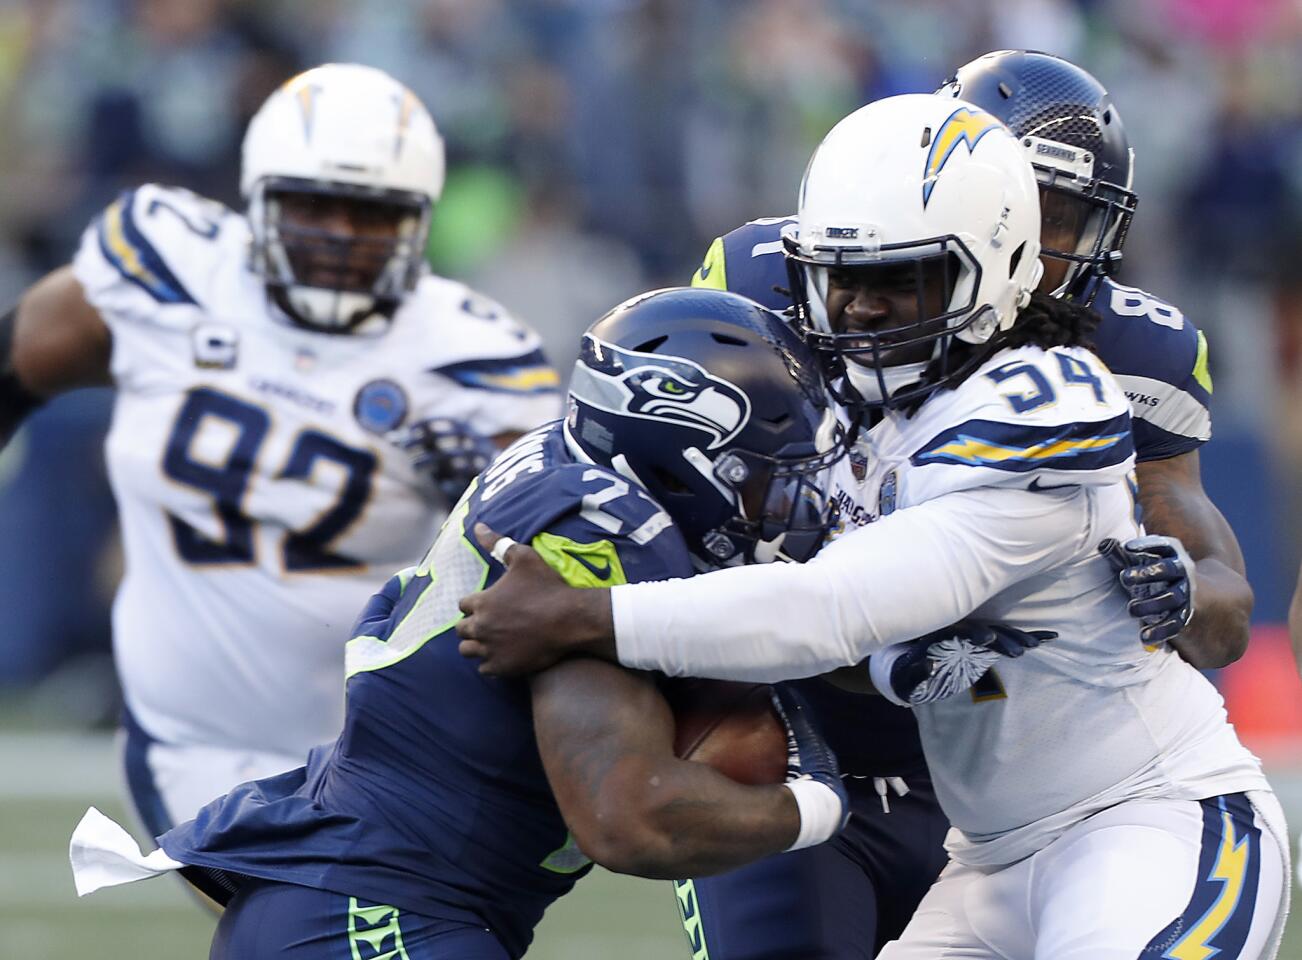 Chargers defensive end Melvin Ingram III wraps up Seattle Seahawks running back Mike Davis in the third quarter Sunday at Century Link Field in Seattle.